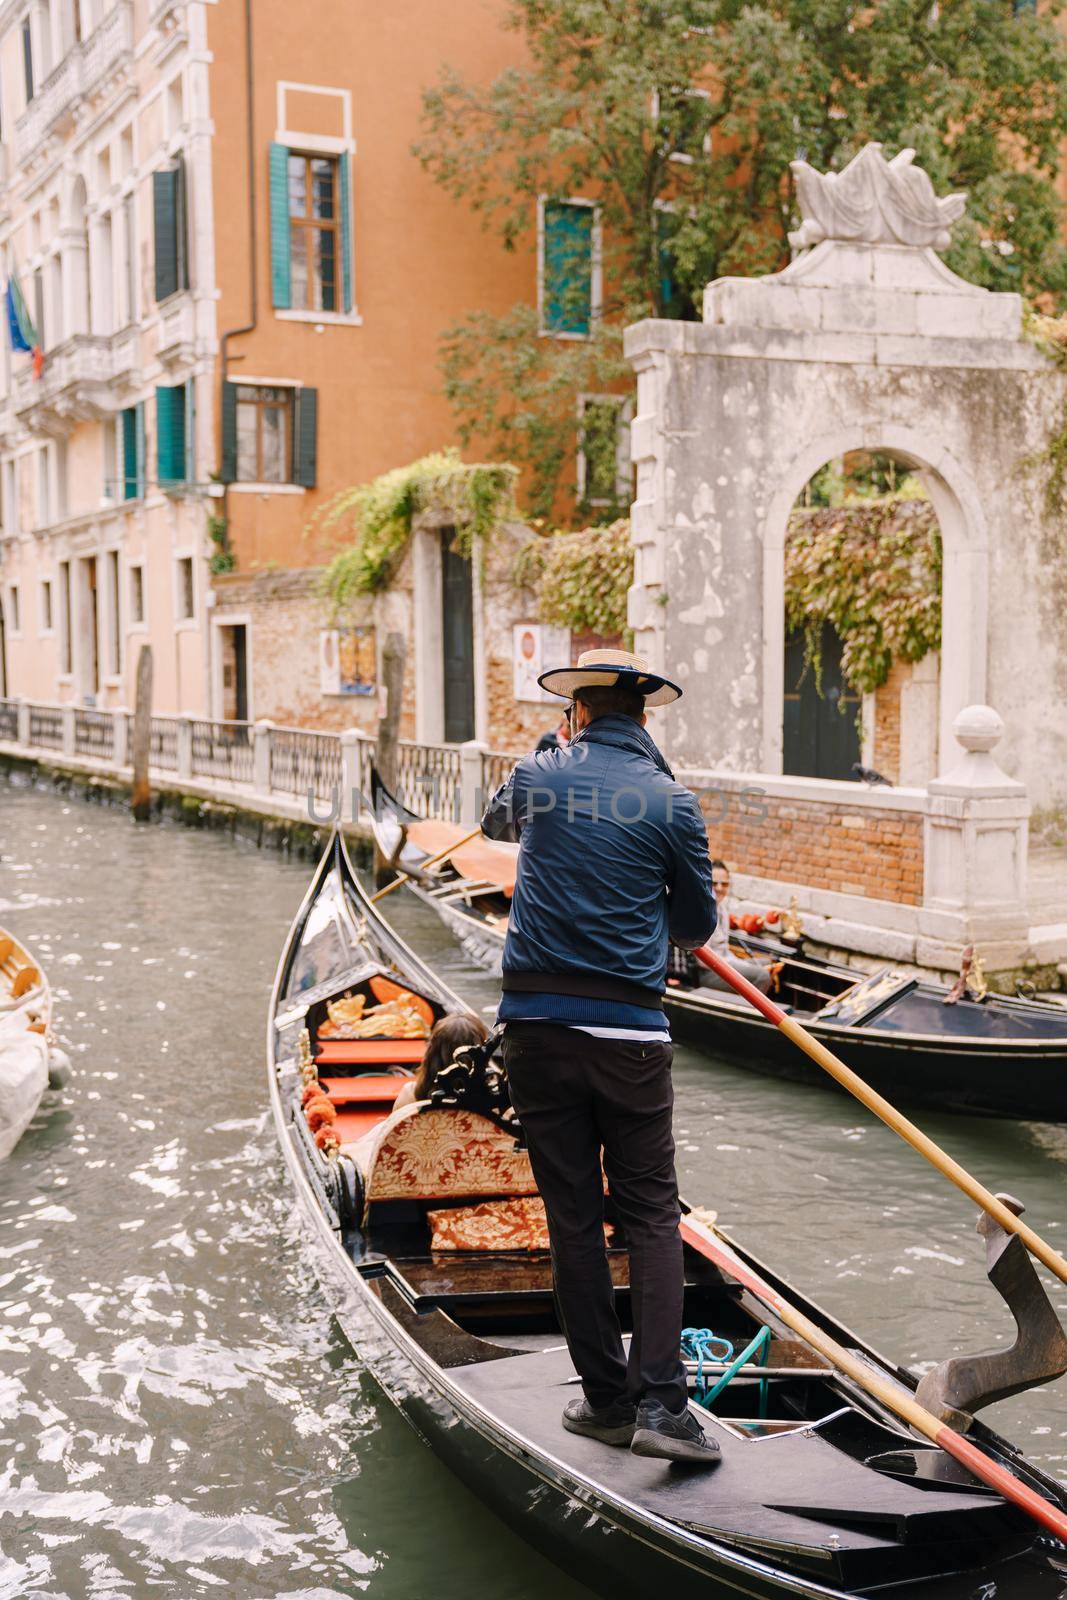 Italy wedding in Venice. A gondolier rolls a bride and groom in a classic wooden gondola along a narrow Venetian canal. The back of a gondolier steering a boat with an oar. by Nadtochiy